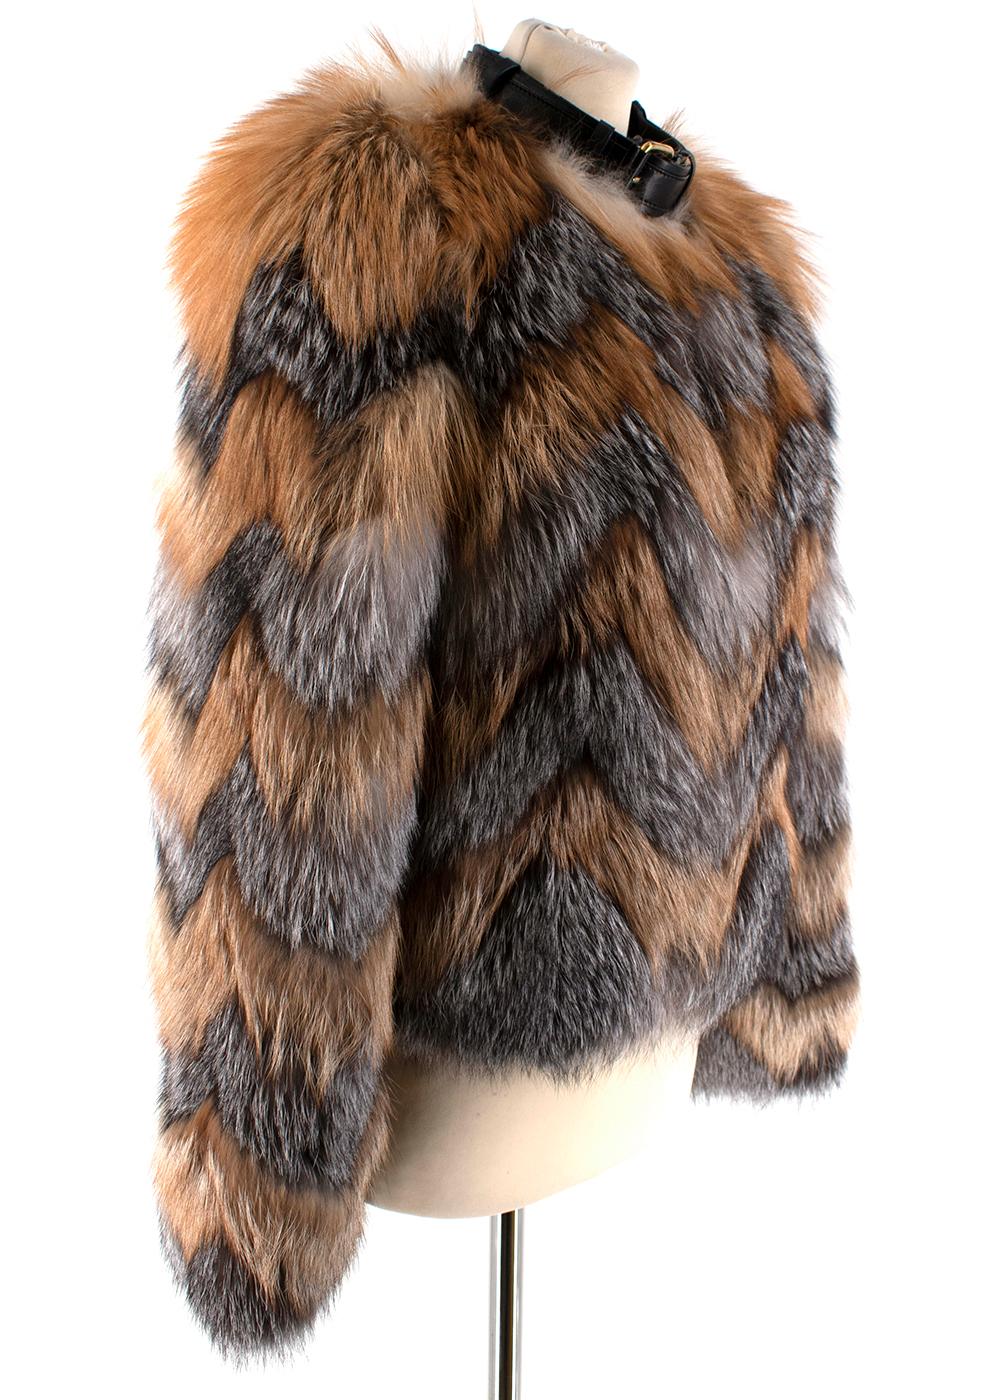 Tom Ford Red & Grey Fox Fur Leather Trimmed Jacket

- Featuring a mixture of soft red fox fur in autumnal shades of orange and cream/grey tones
- Lambskin leather neckline with gold hardware clasps
- Long sleeves
- Very warm perfect for the winter
-